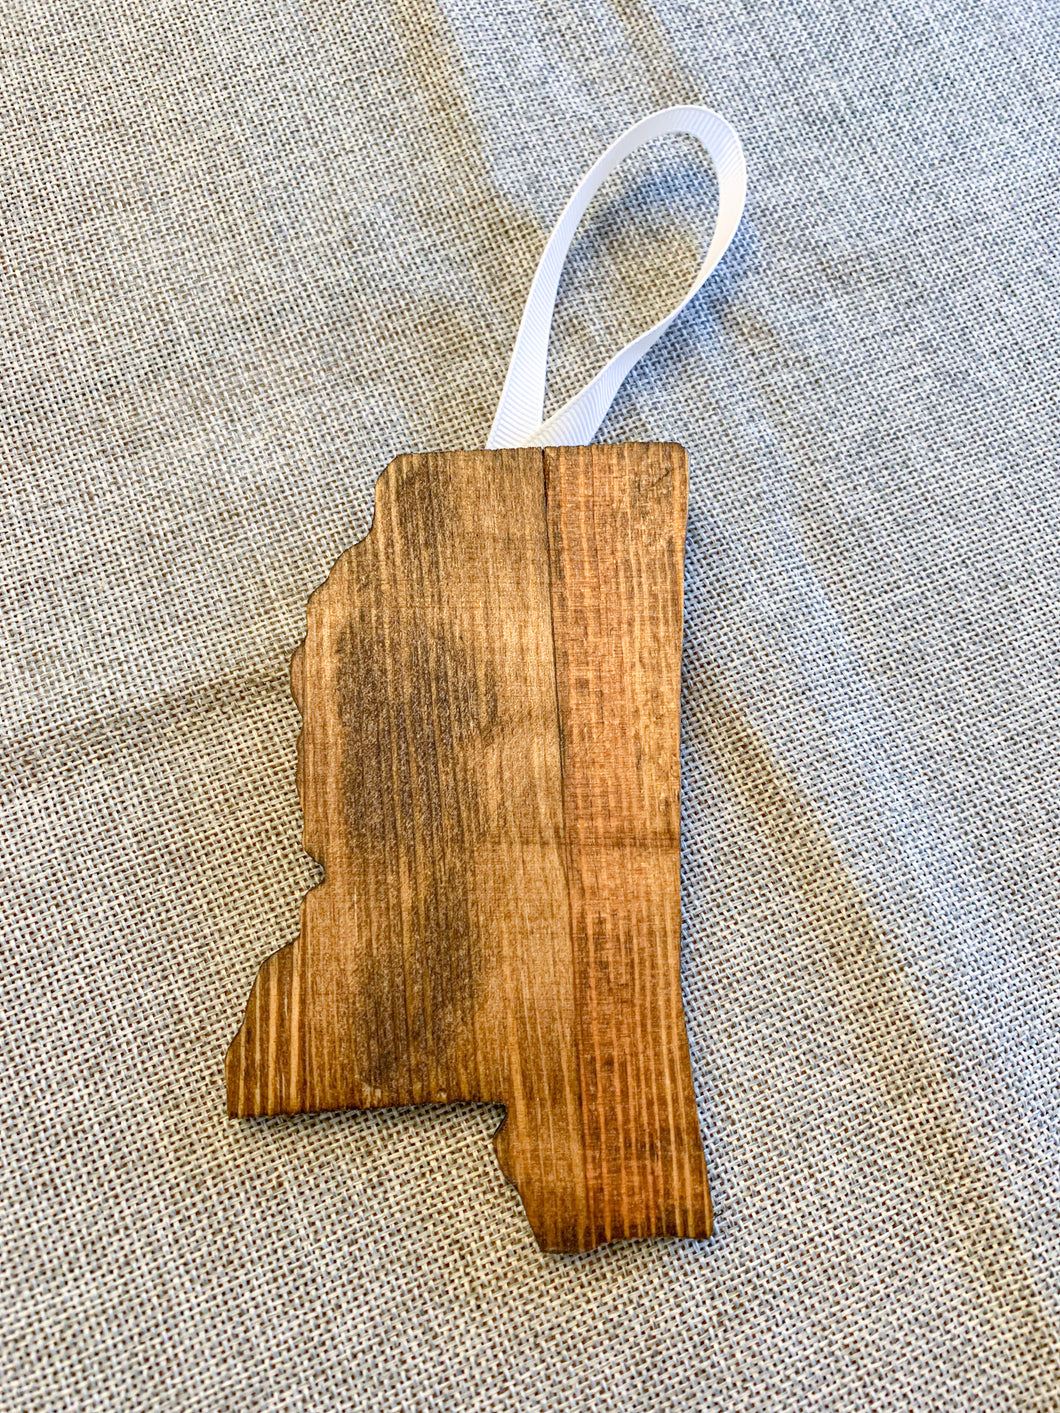 Reclaimed Wood Mississippi Ornament